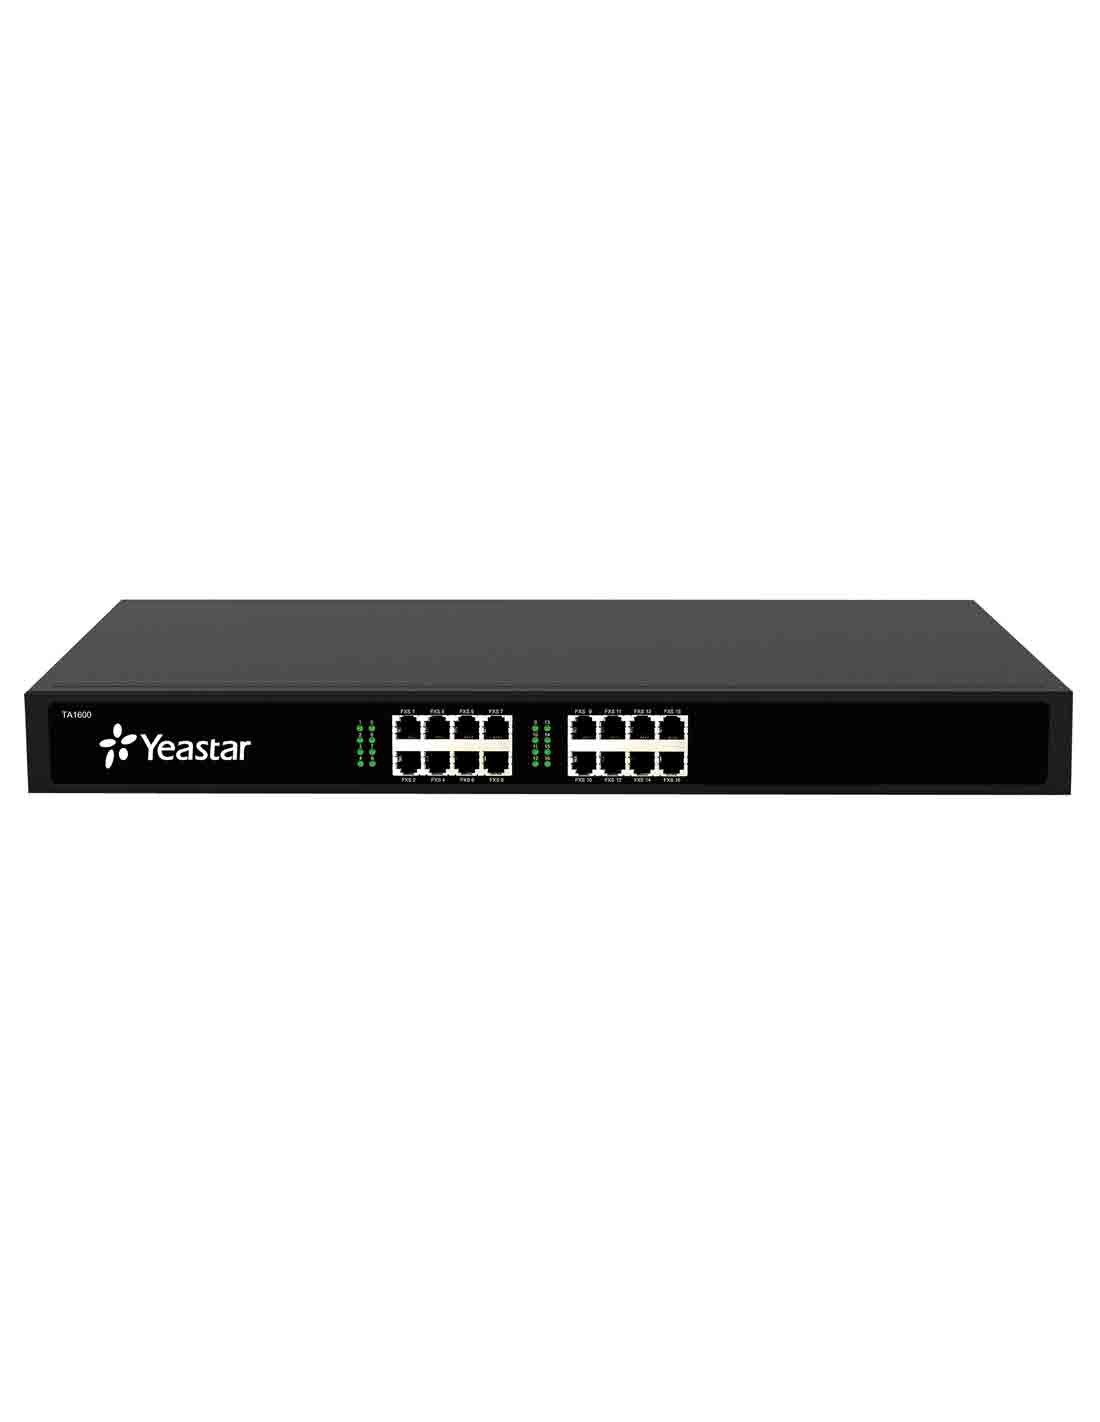 Yeastar TA1600 FXS VoIP Gateway with best deal options in Dubai Online Store